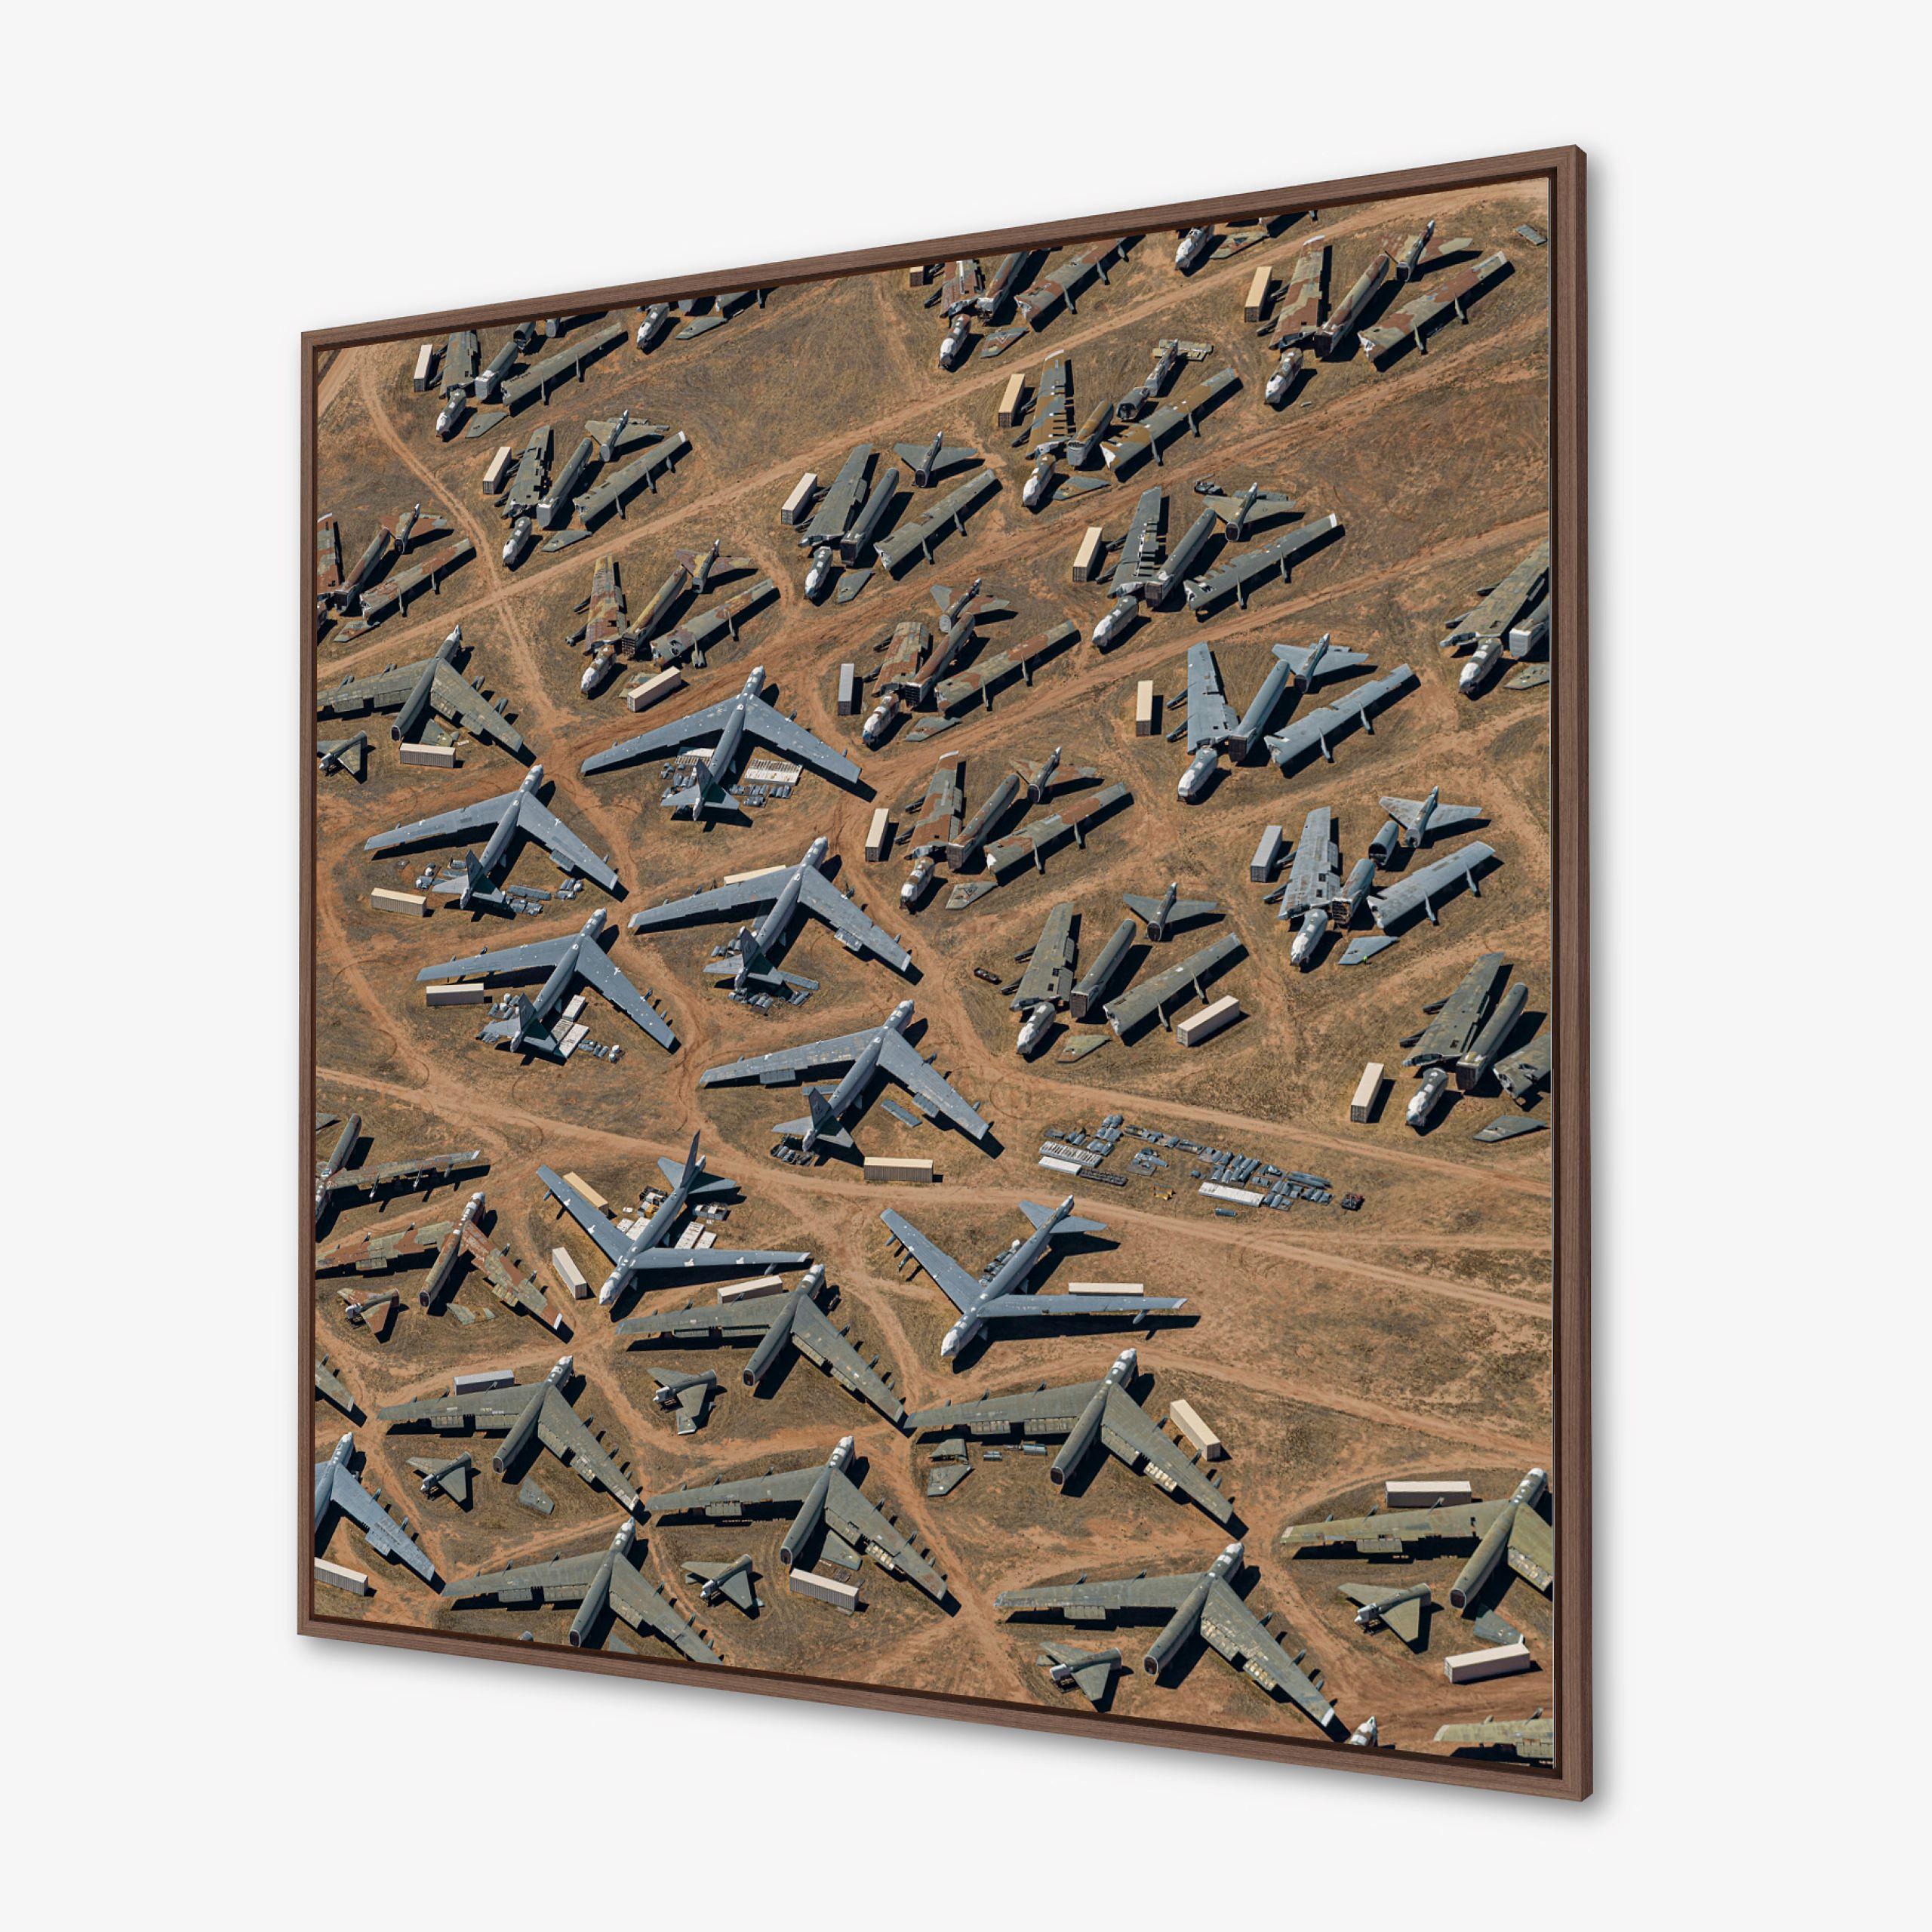 Aerial Views, Boneyard 003 by Bernhard Lang - Aerial photography, planes For Sale 4